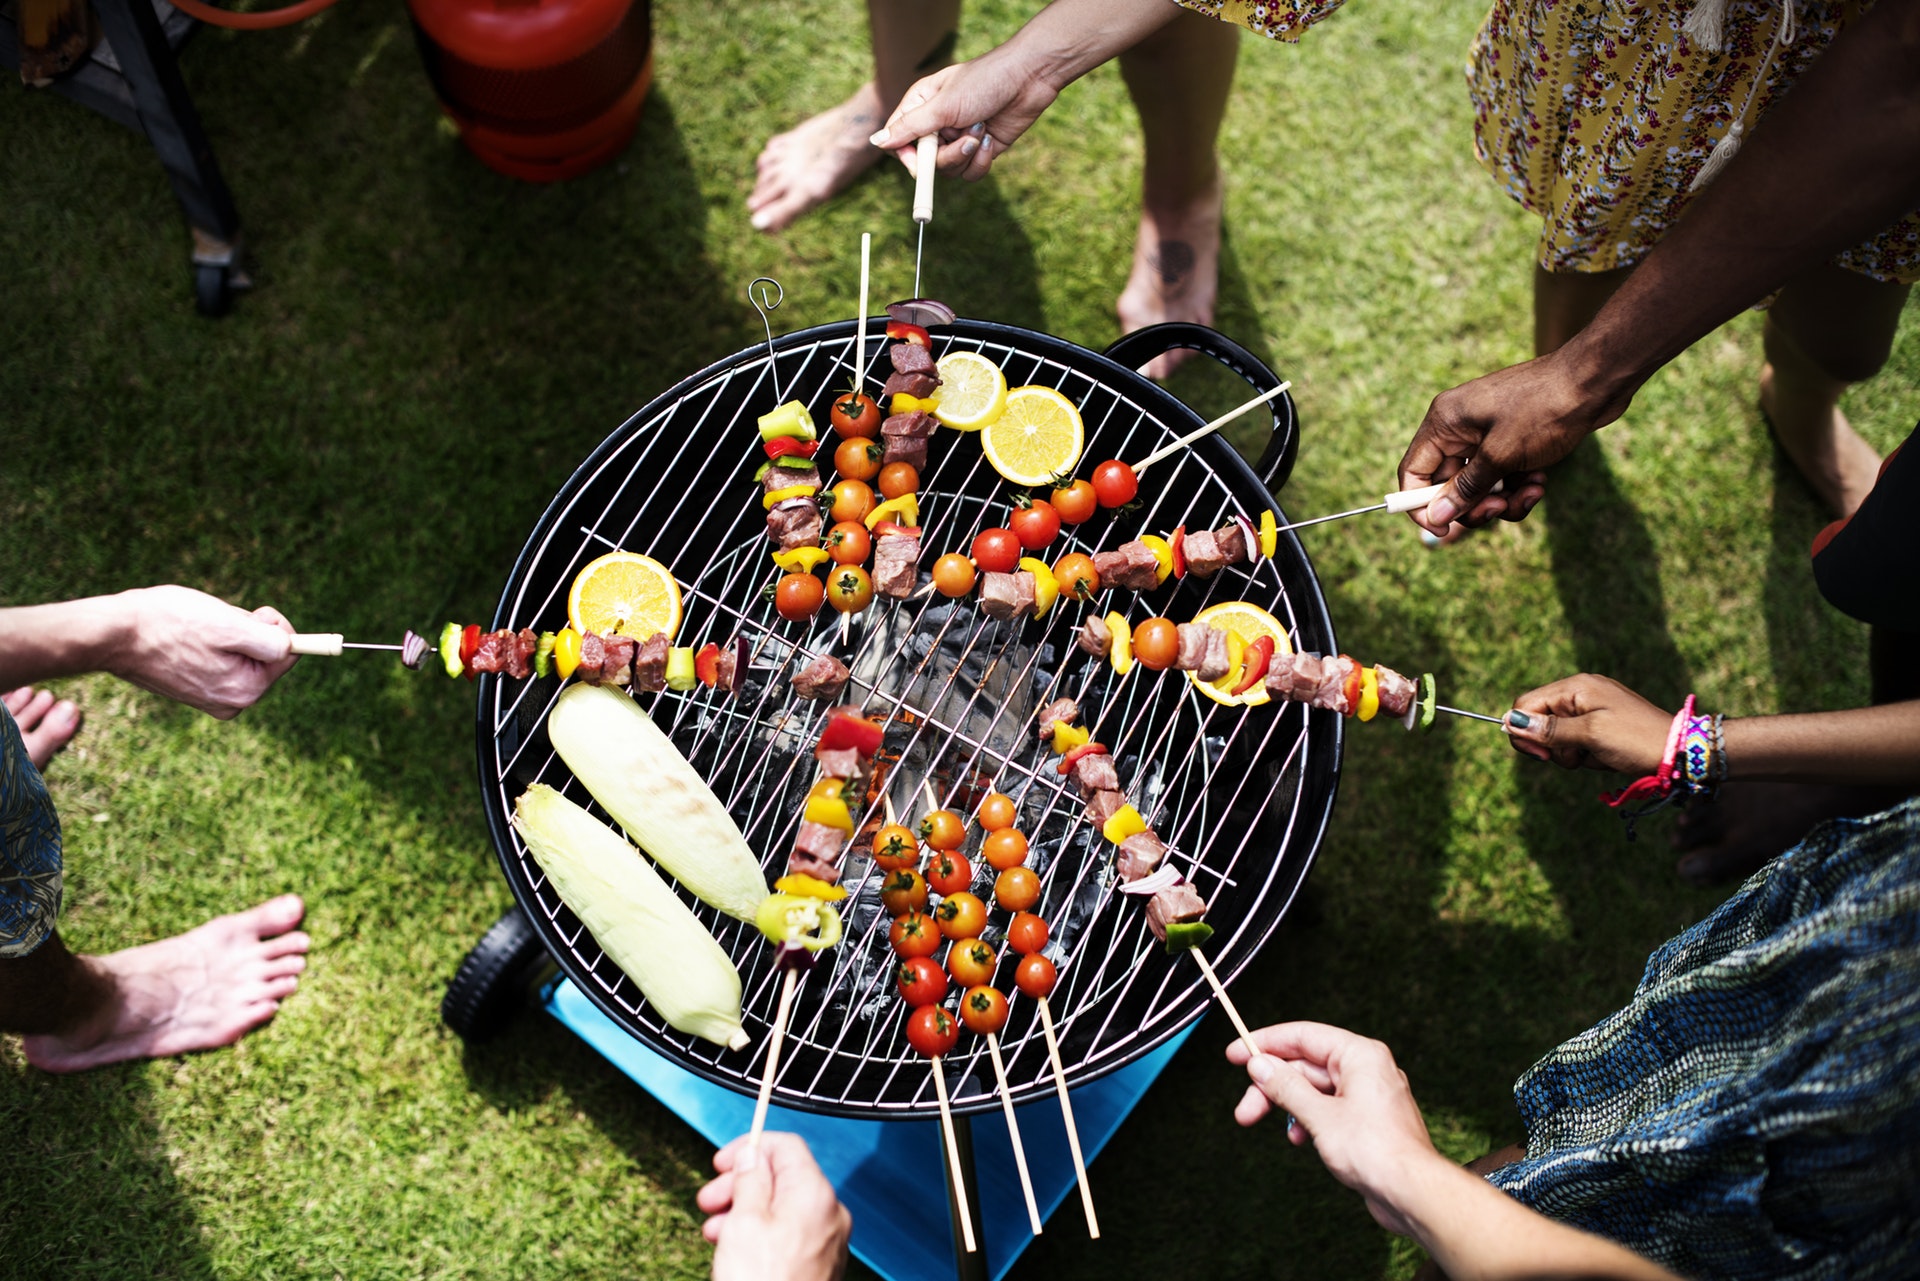 8 Things to Consider Before Throwing an Outdoor BBQ Party